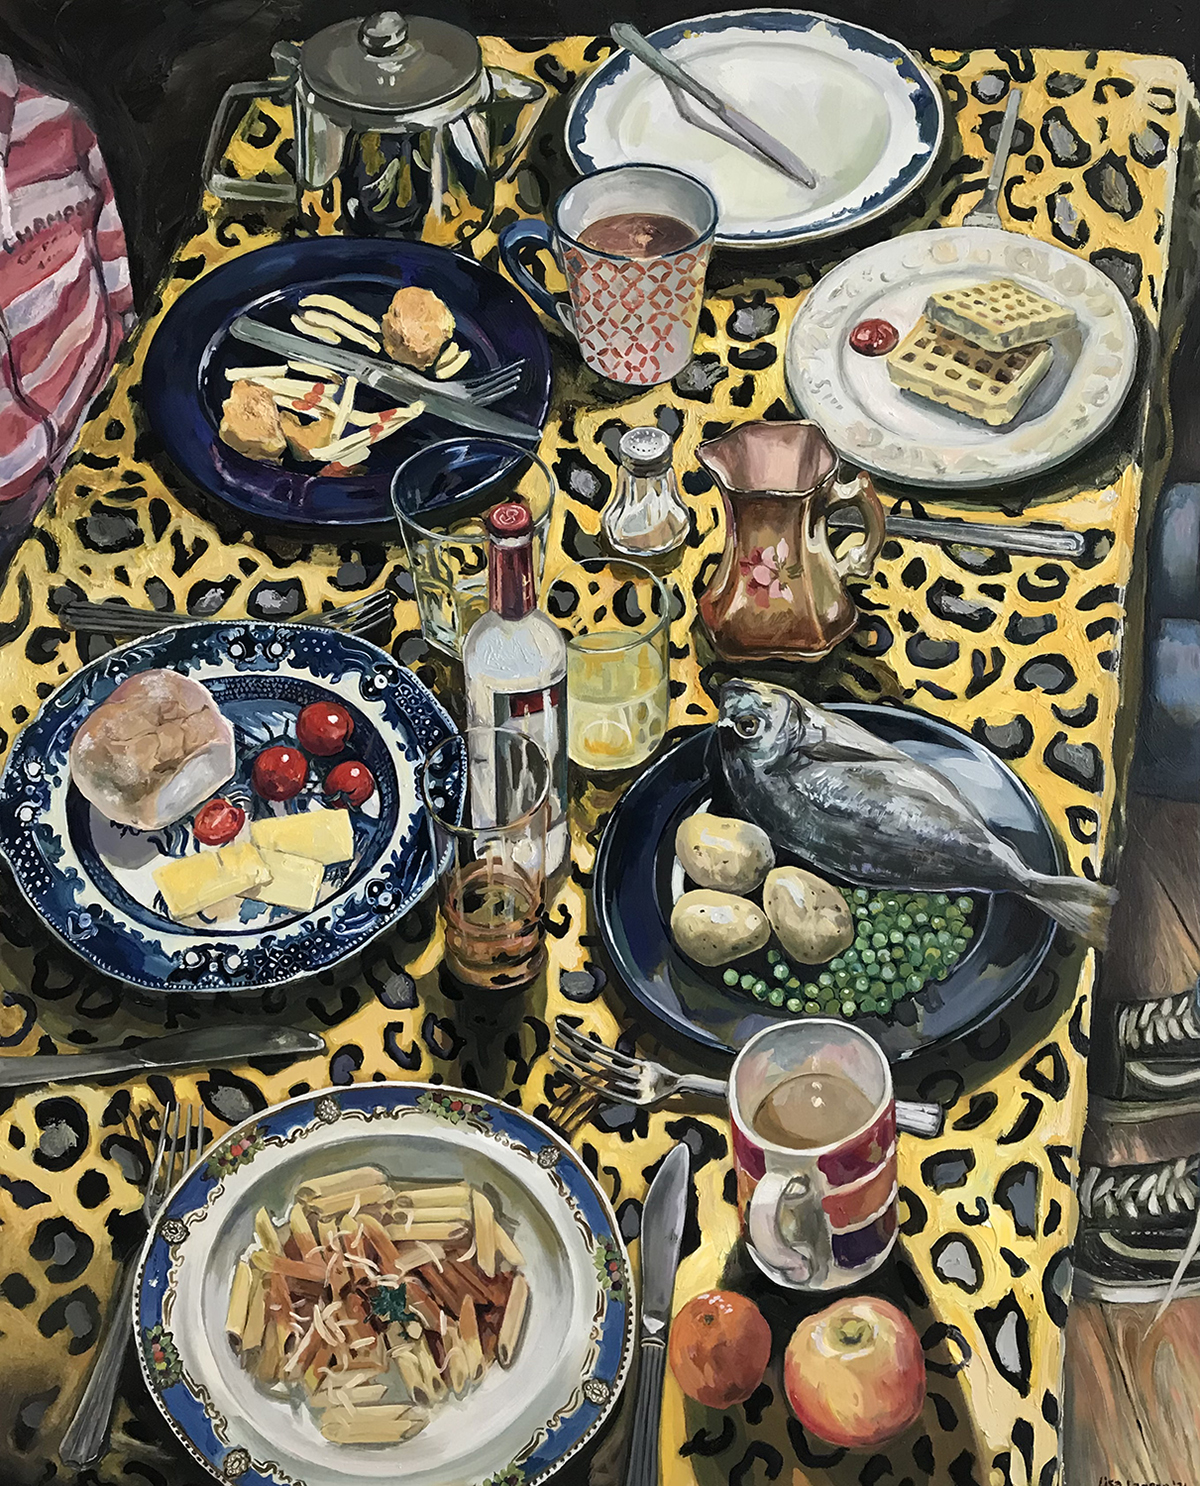 Leopard Print Lunch by Lisa Langan at the Sefton Open art exhibition at The Atkinson in Southport